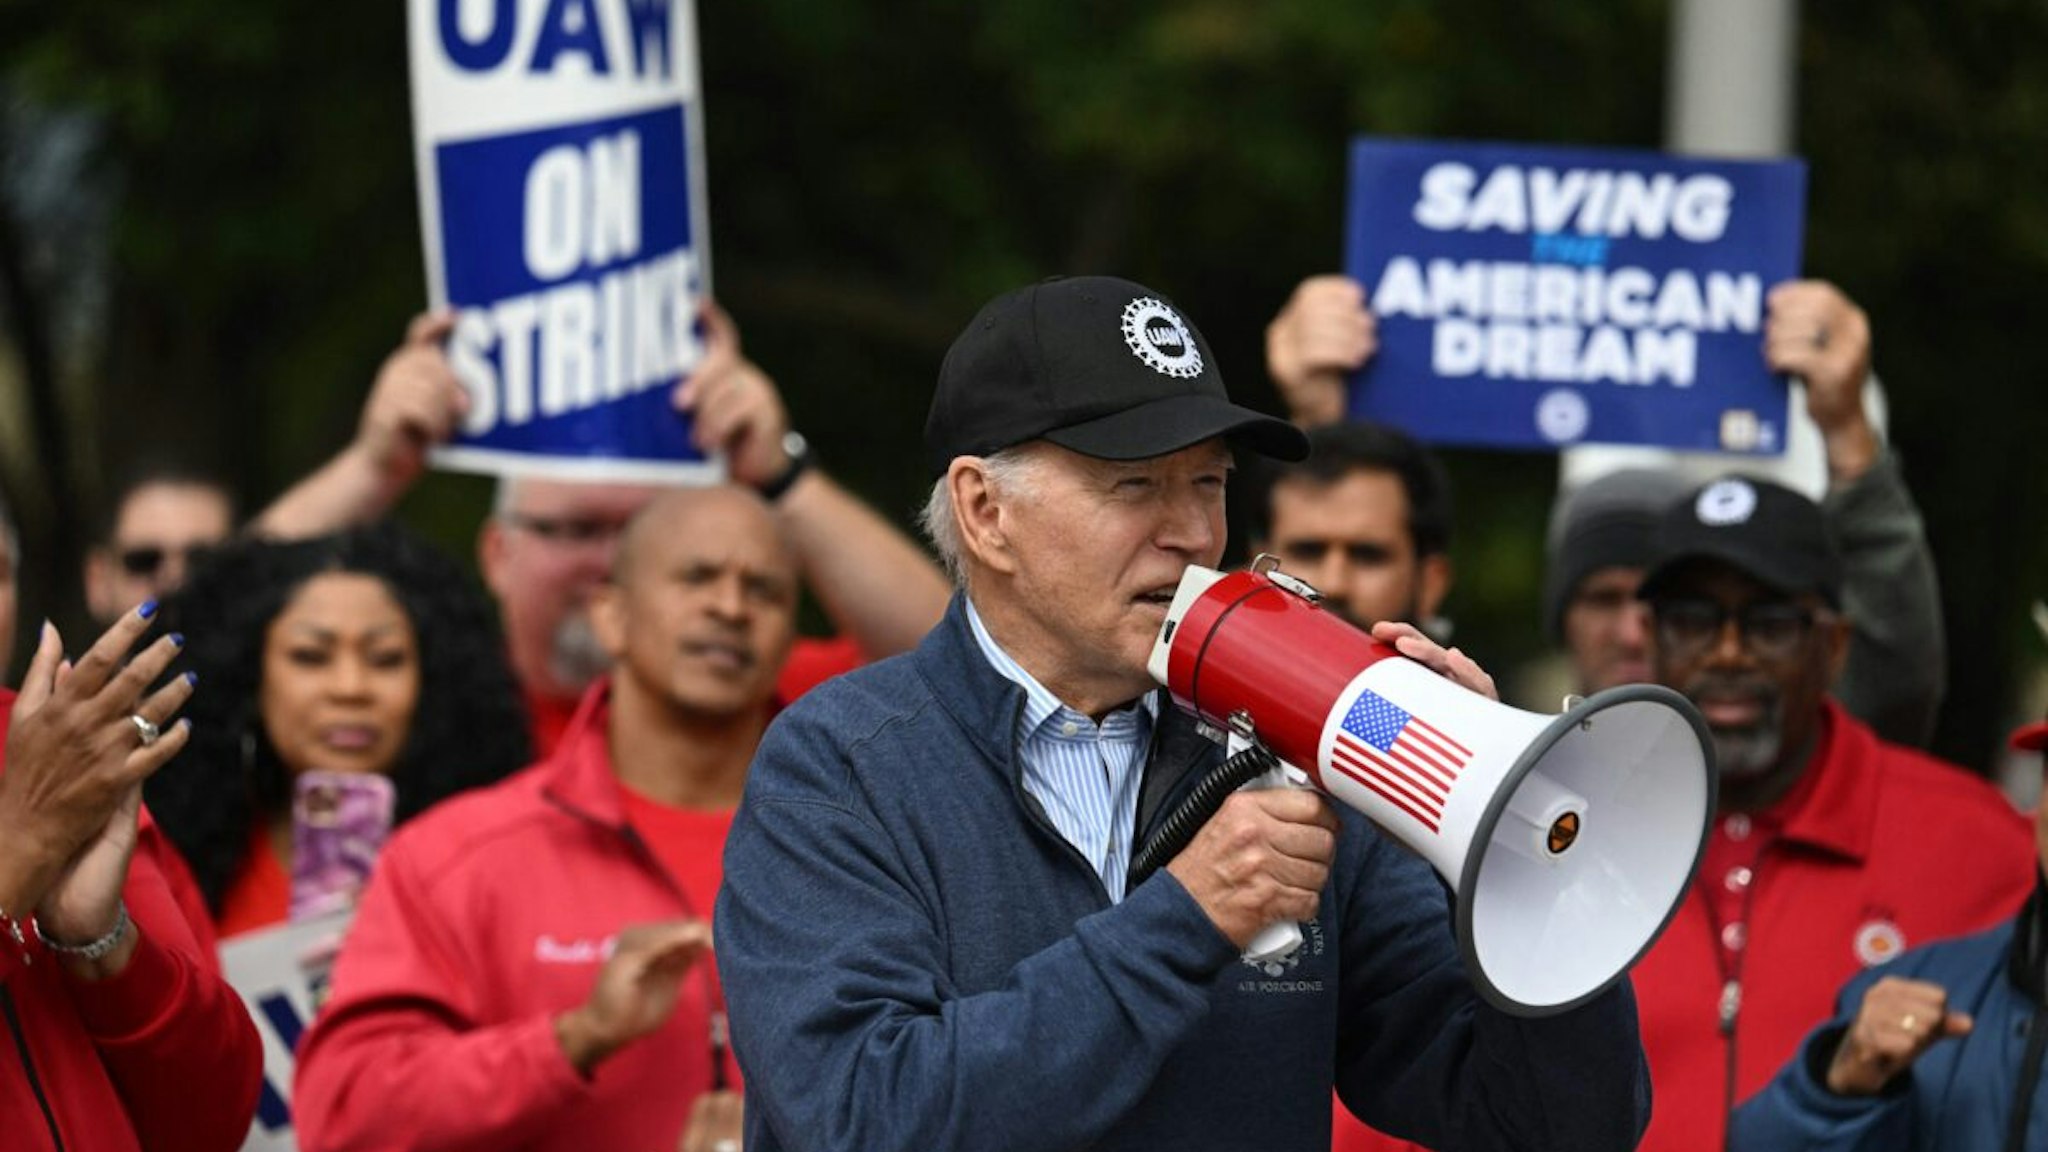 US President Joe Biden addresses striking members of the United Auto Workers (UAW) union at a picket line outside a General Motors Service Parts Operations plant in Belleville, Michigan, on September 26, 2023.